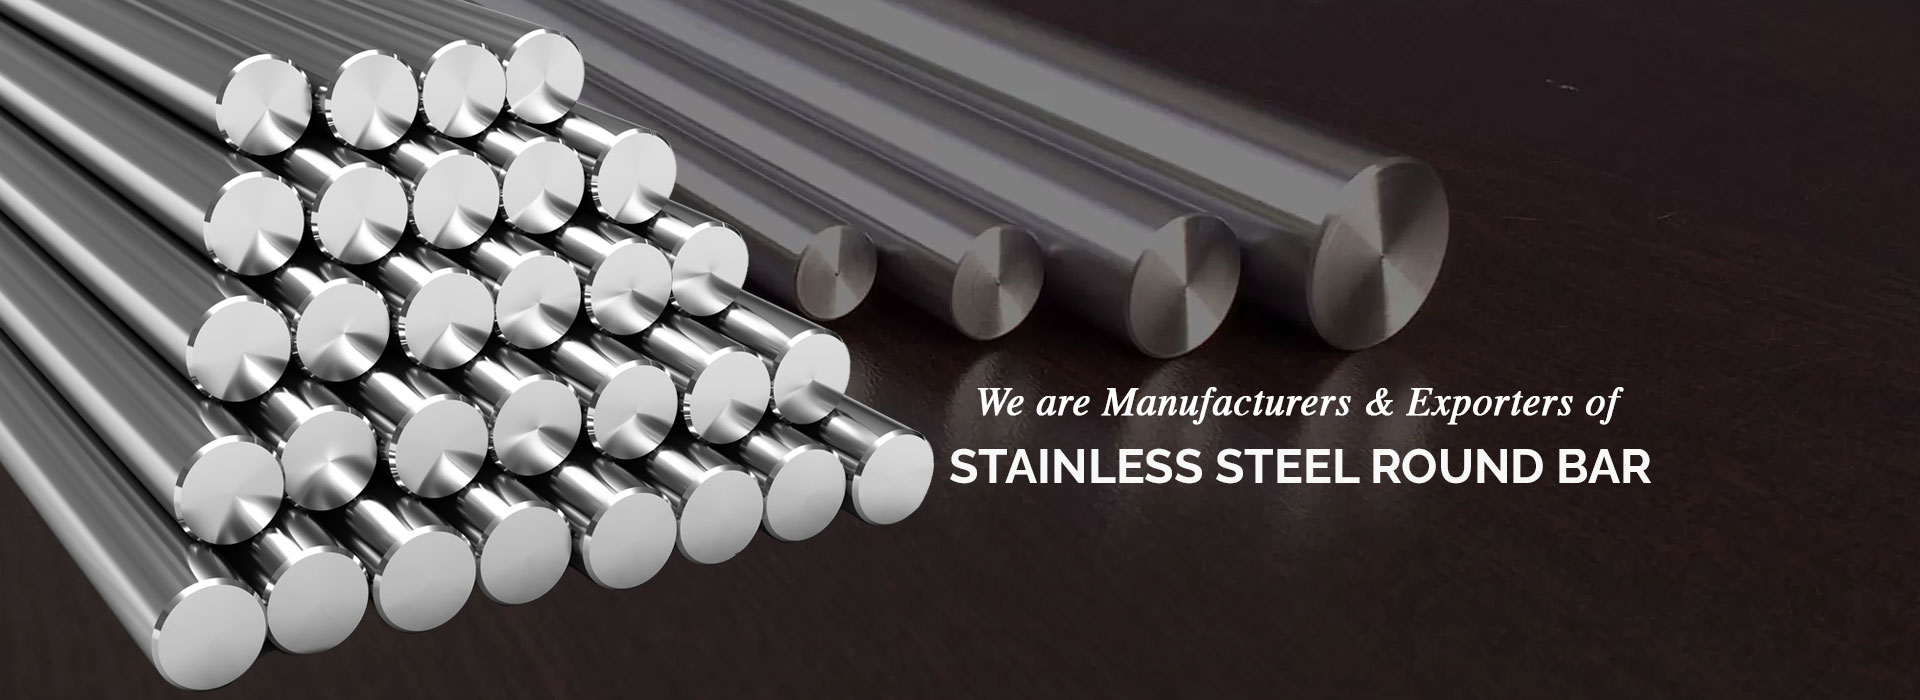 Stainless Steel Round Bar Manufacturers in Korea